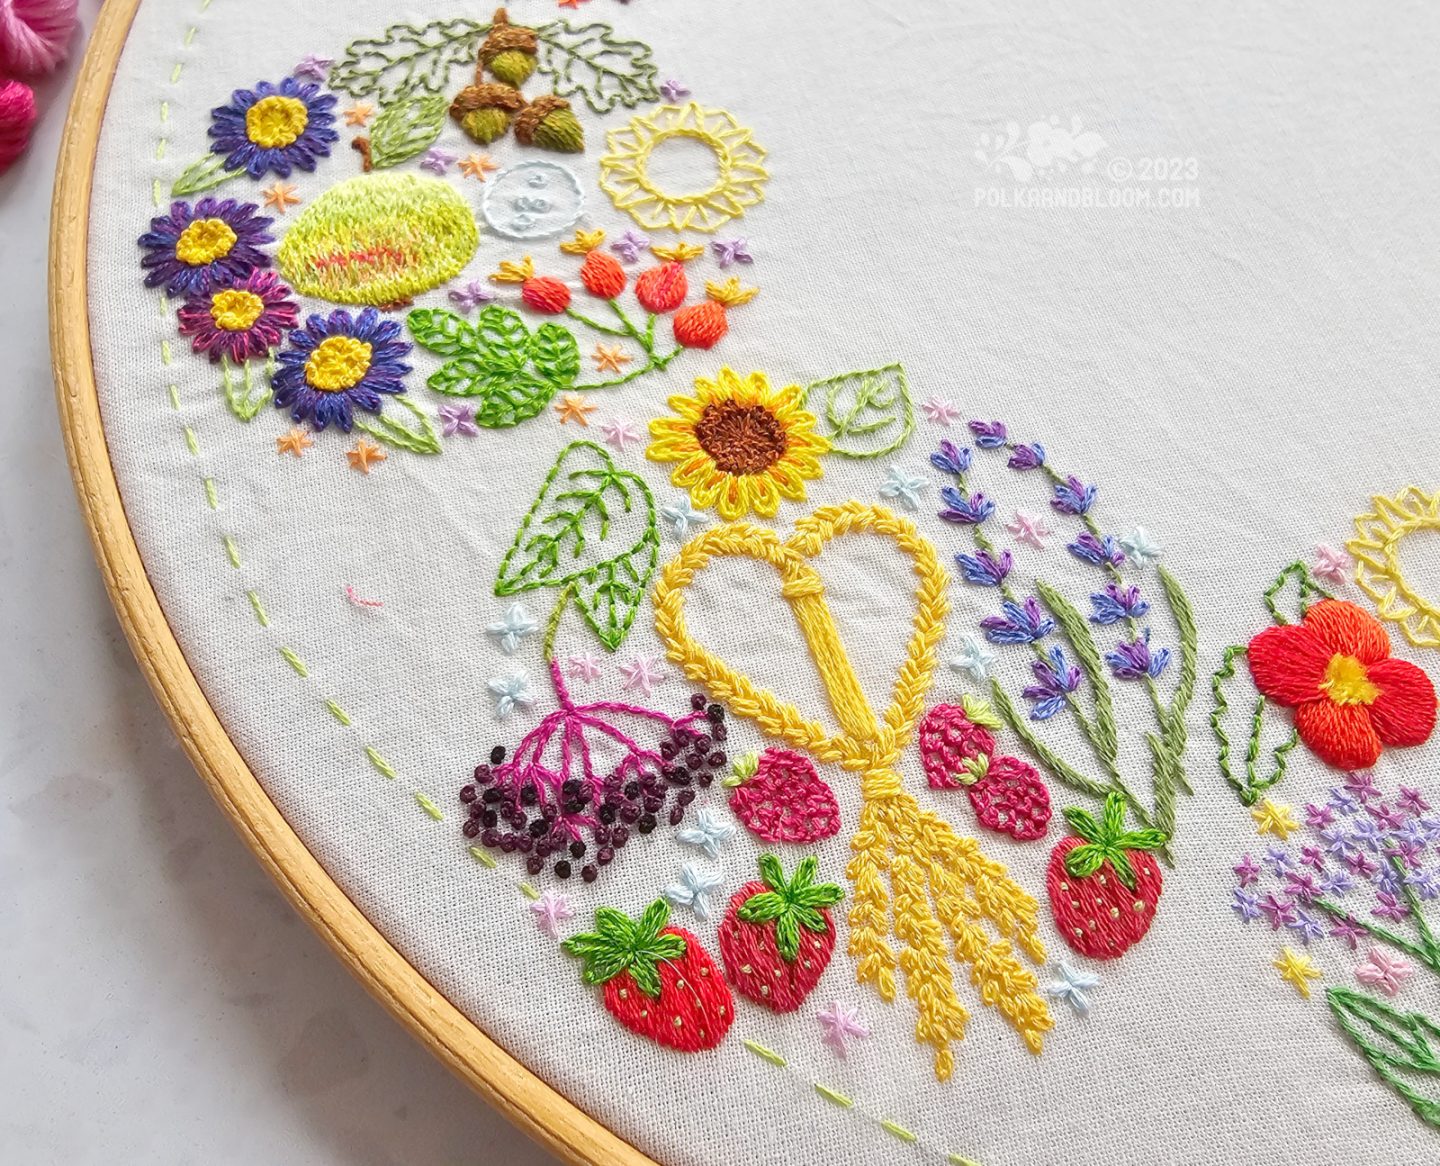 Closeup of a circular embroidery with strawberries, lavender, elderberries and sunflower.